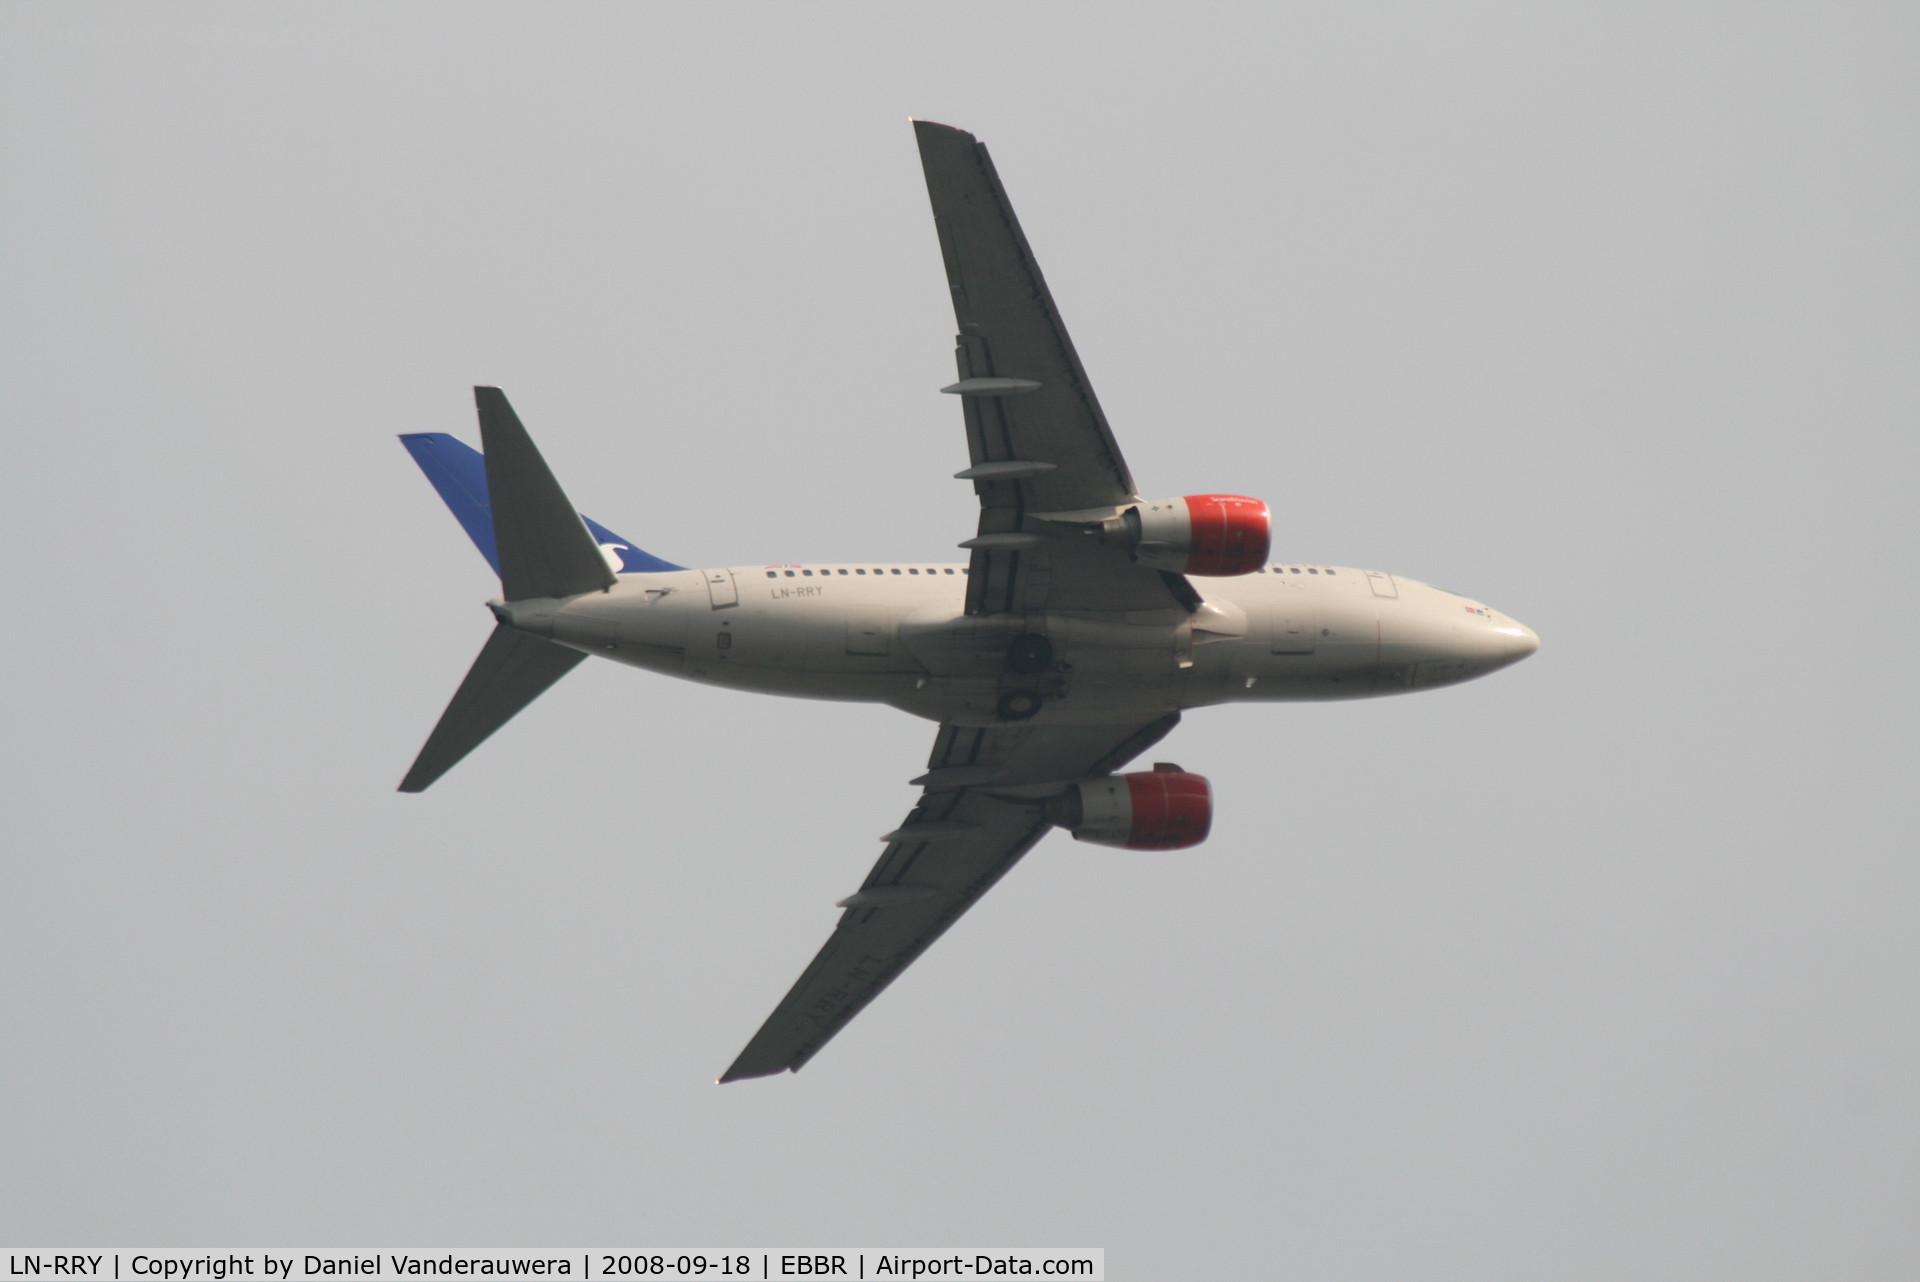 LN-RRY, 1998 Boeing 737-683 C/N 28297, On approach to RWY 07L